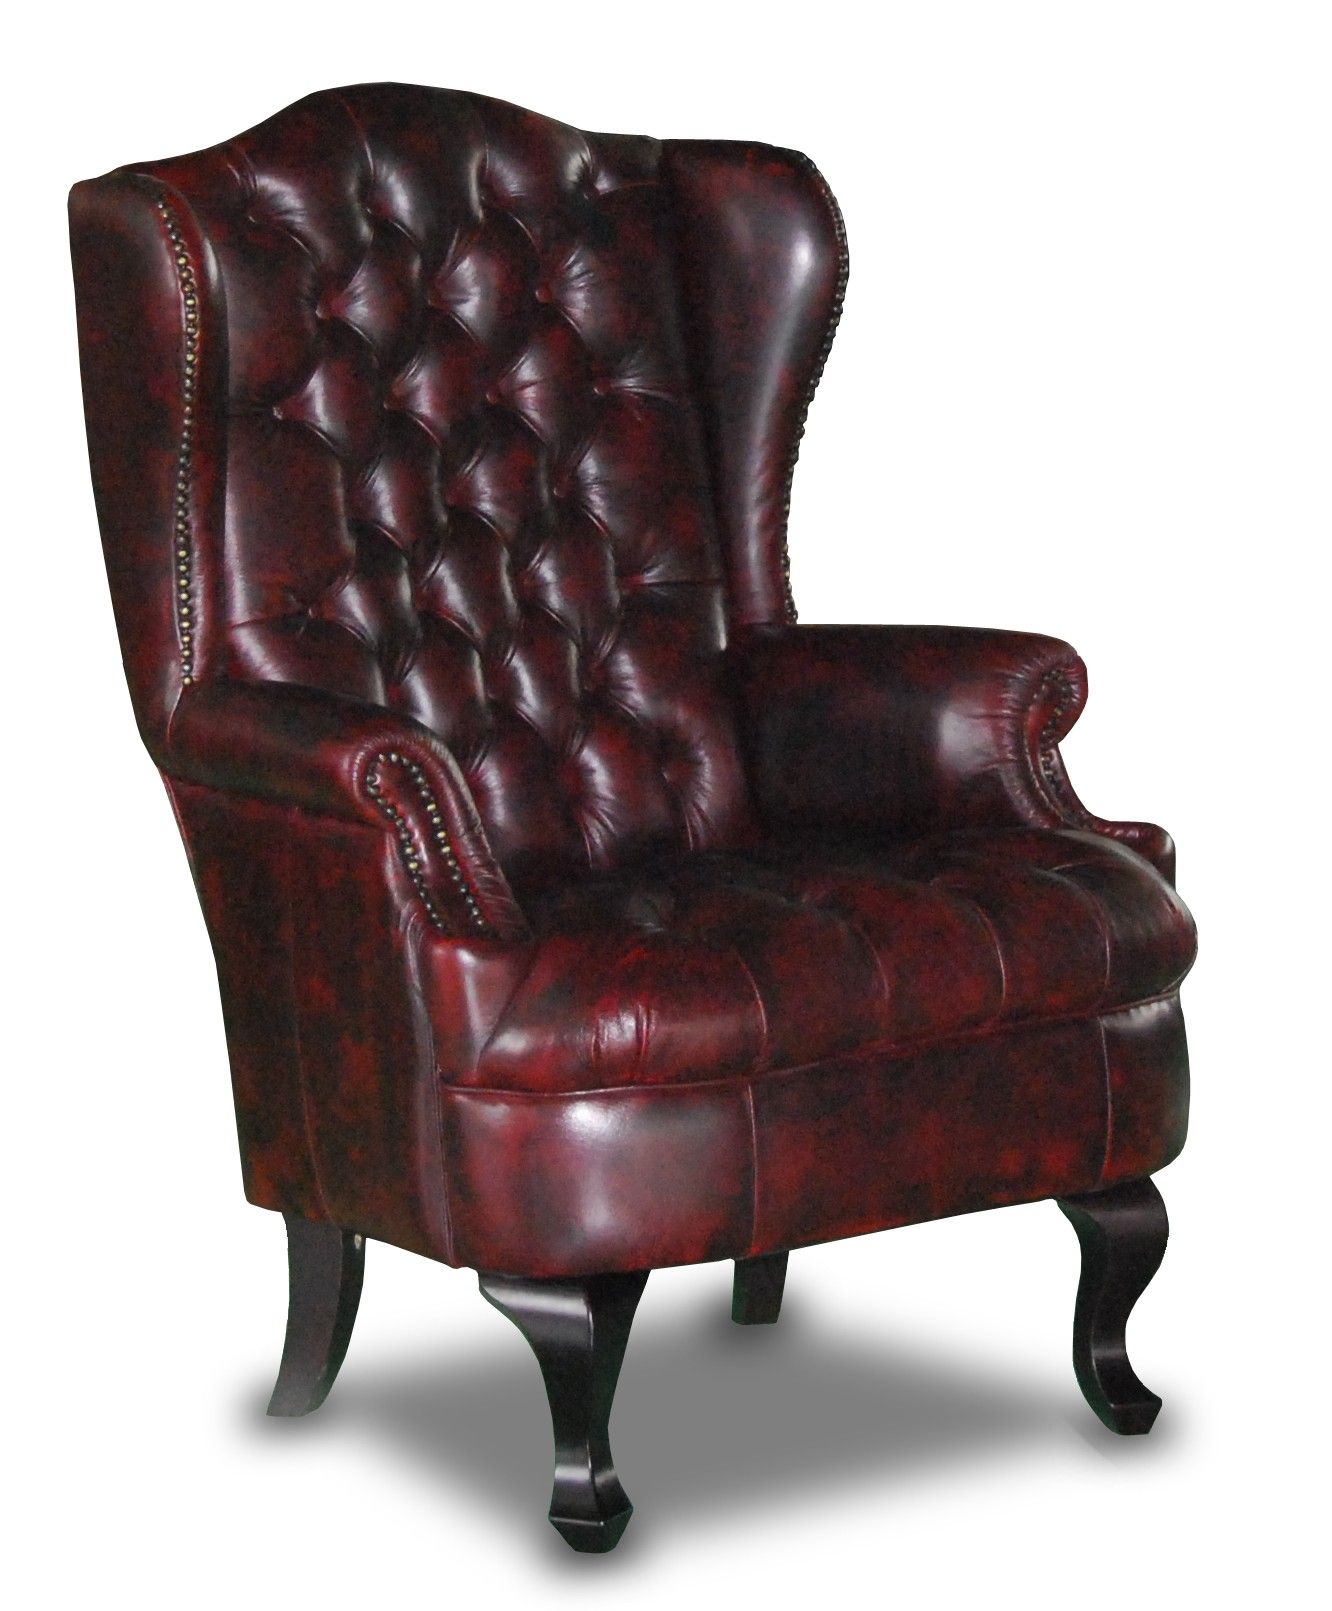 Wing Chair for Added Comfort at Home